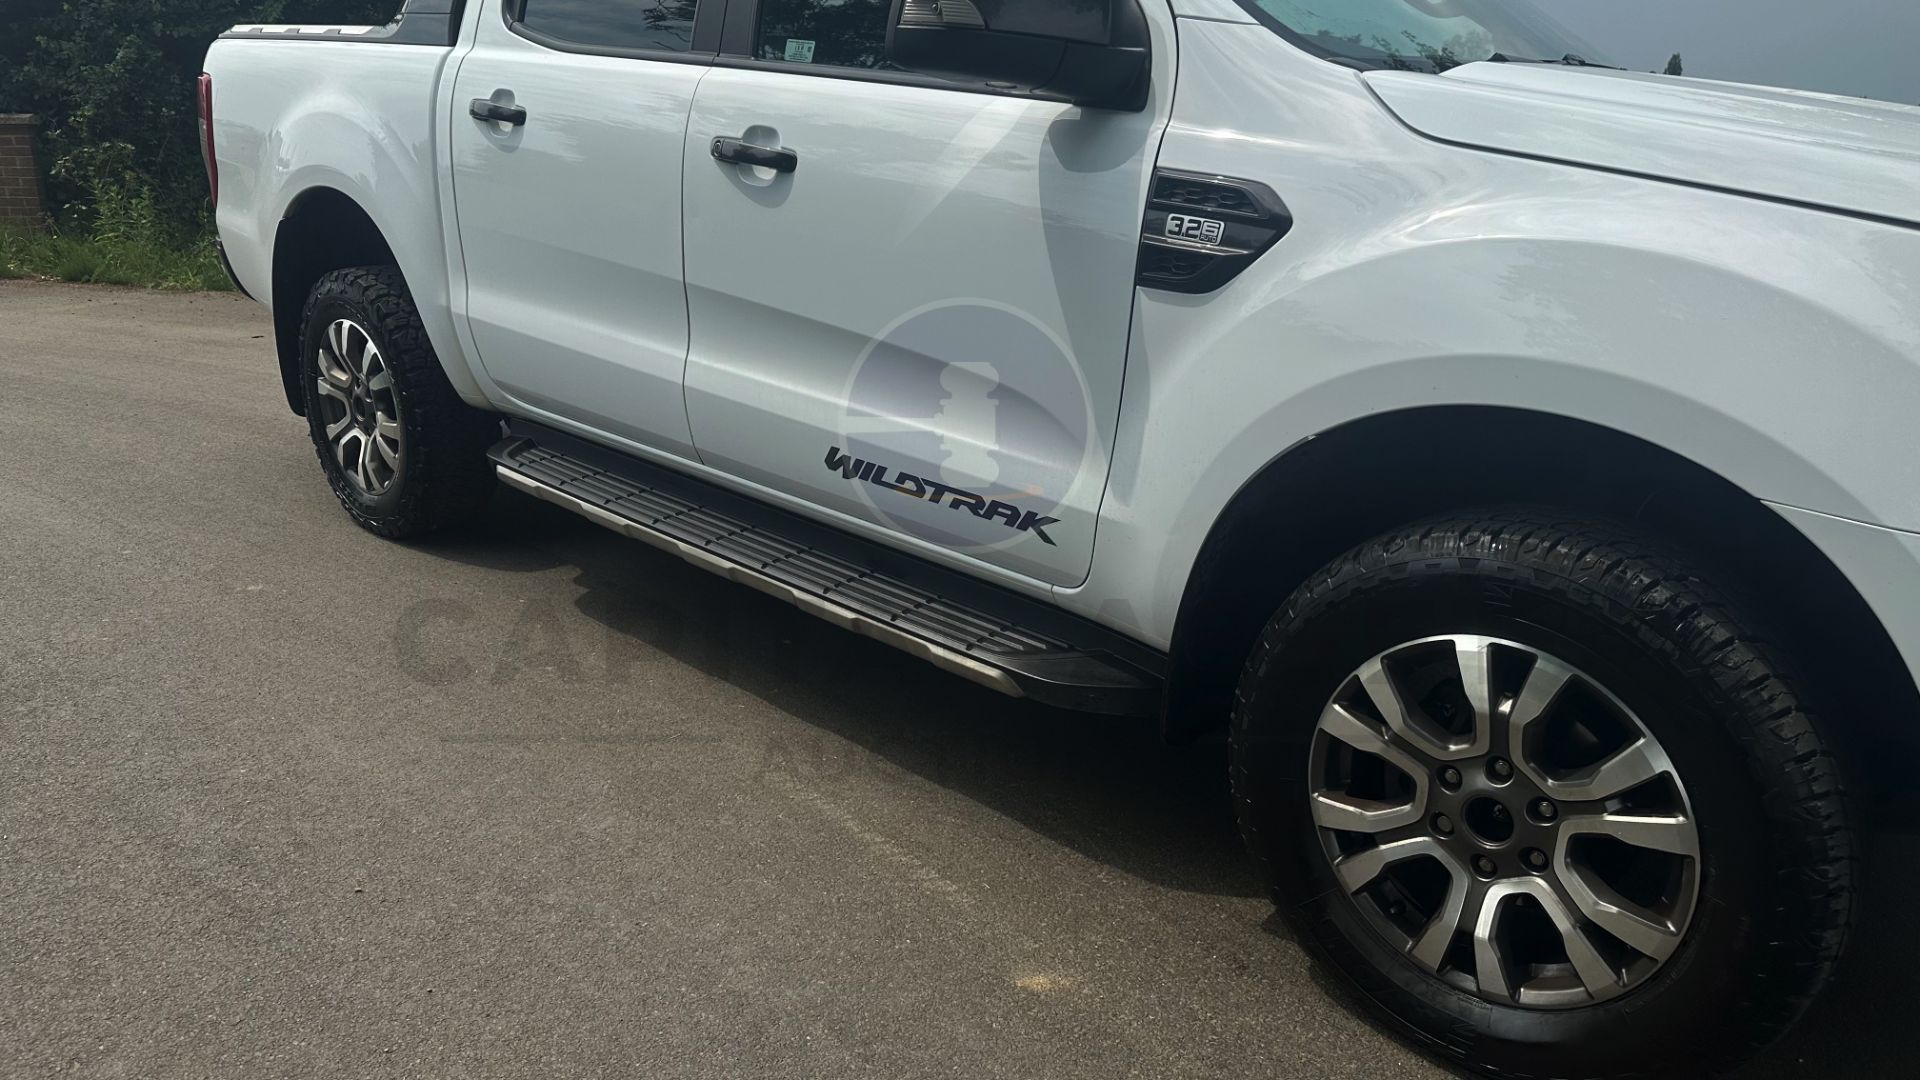 (ON SALE) FORD RANGER *WILDTRAK* DOUBLE CAB PICK-UP (2019 - EURO 6) 3.2 TDCI - AUTOMATIC (1 OWNER) - Image 15 of 50